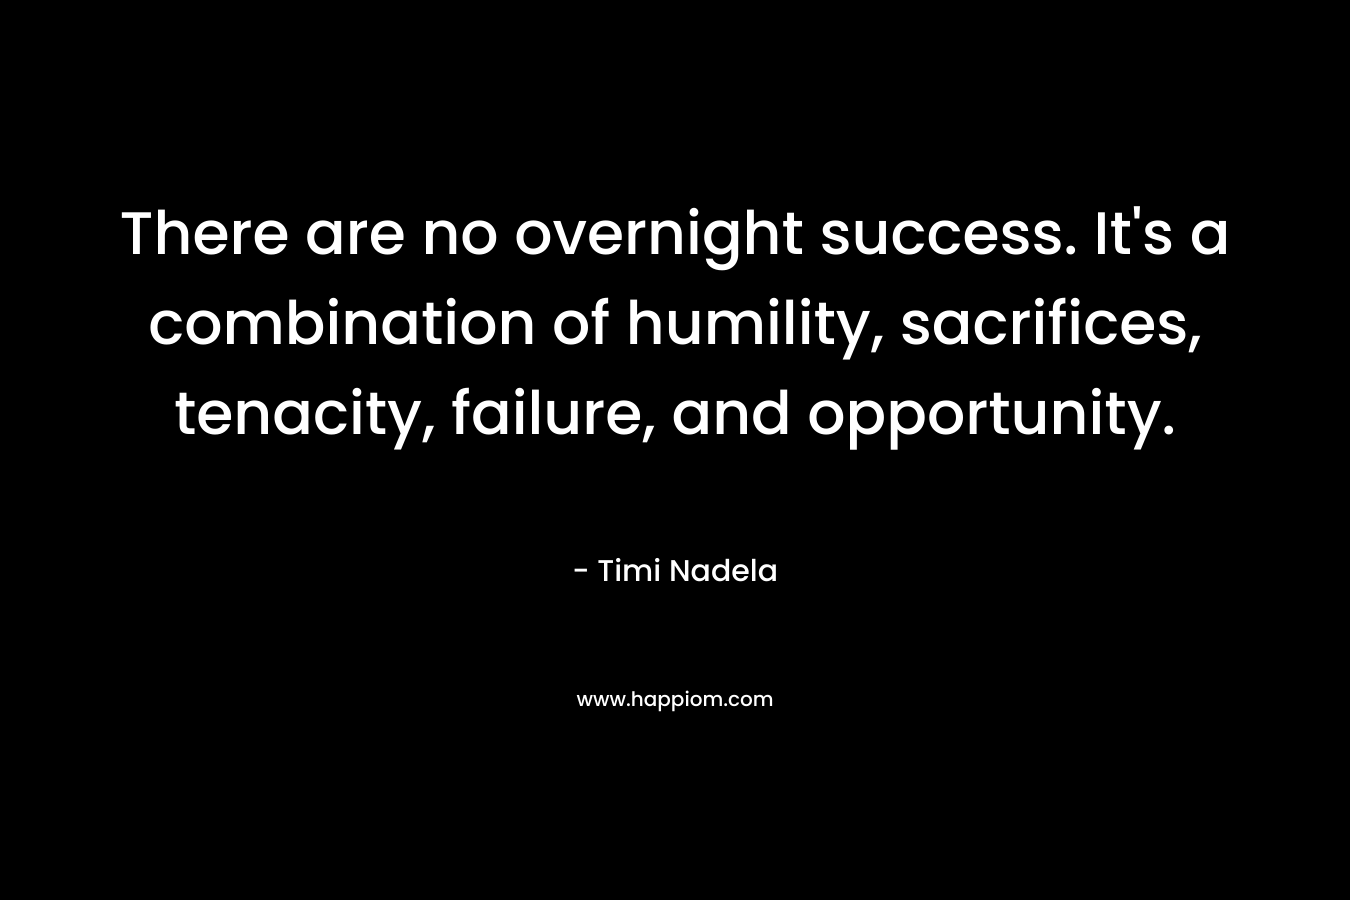 There are no overnight success. It’s a combination of humility, sacrifices, tenacity, failure, and opportunity. – Timi Nadela